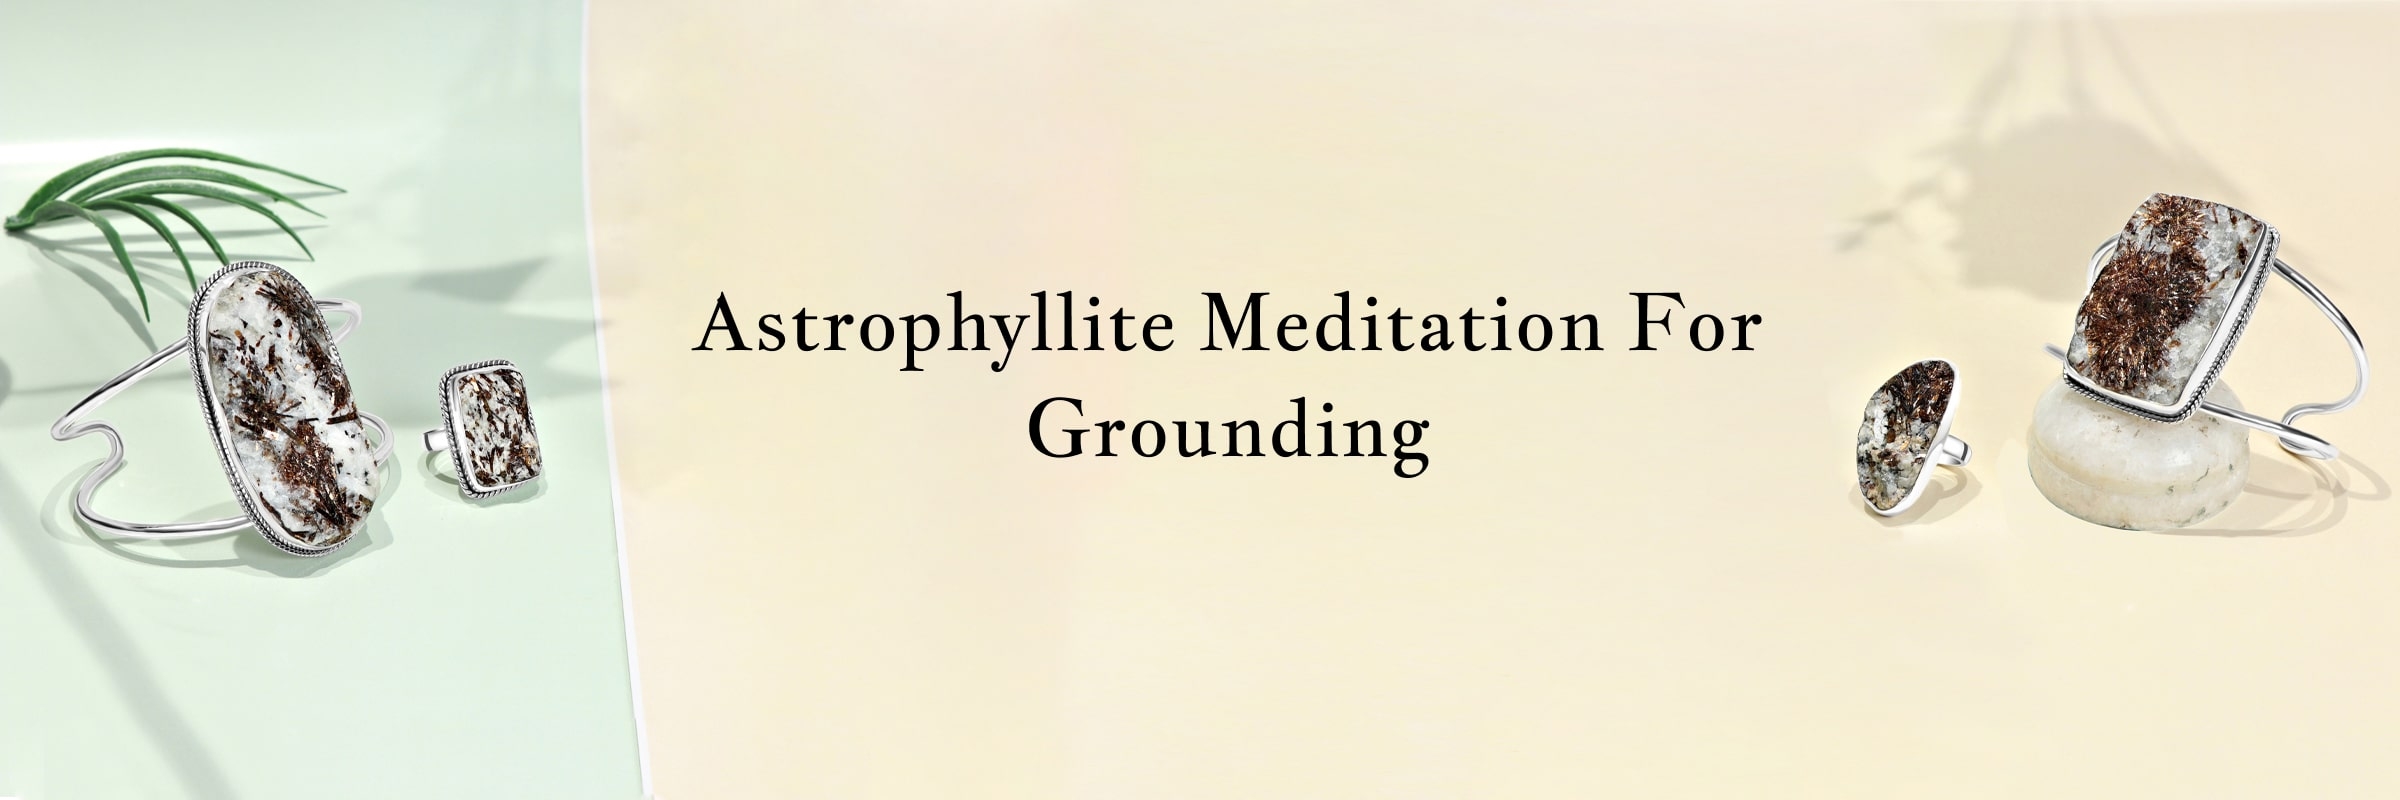 Astrophyllite Meditation and Grounding